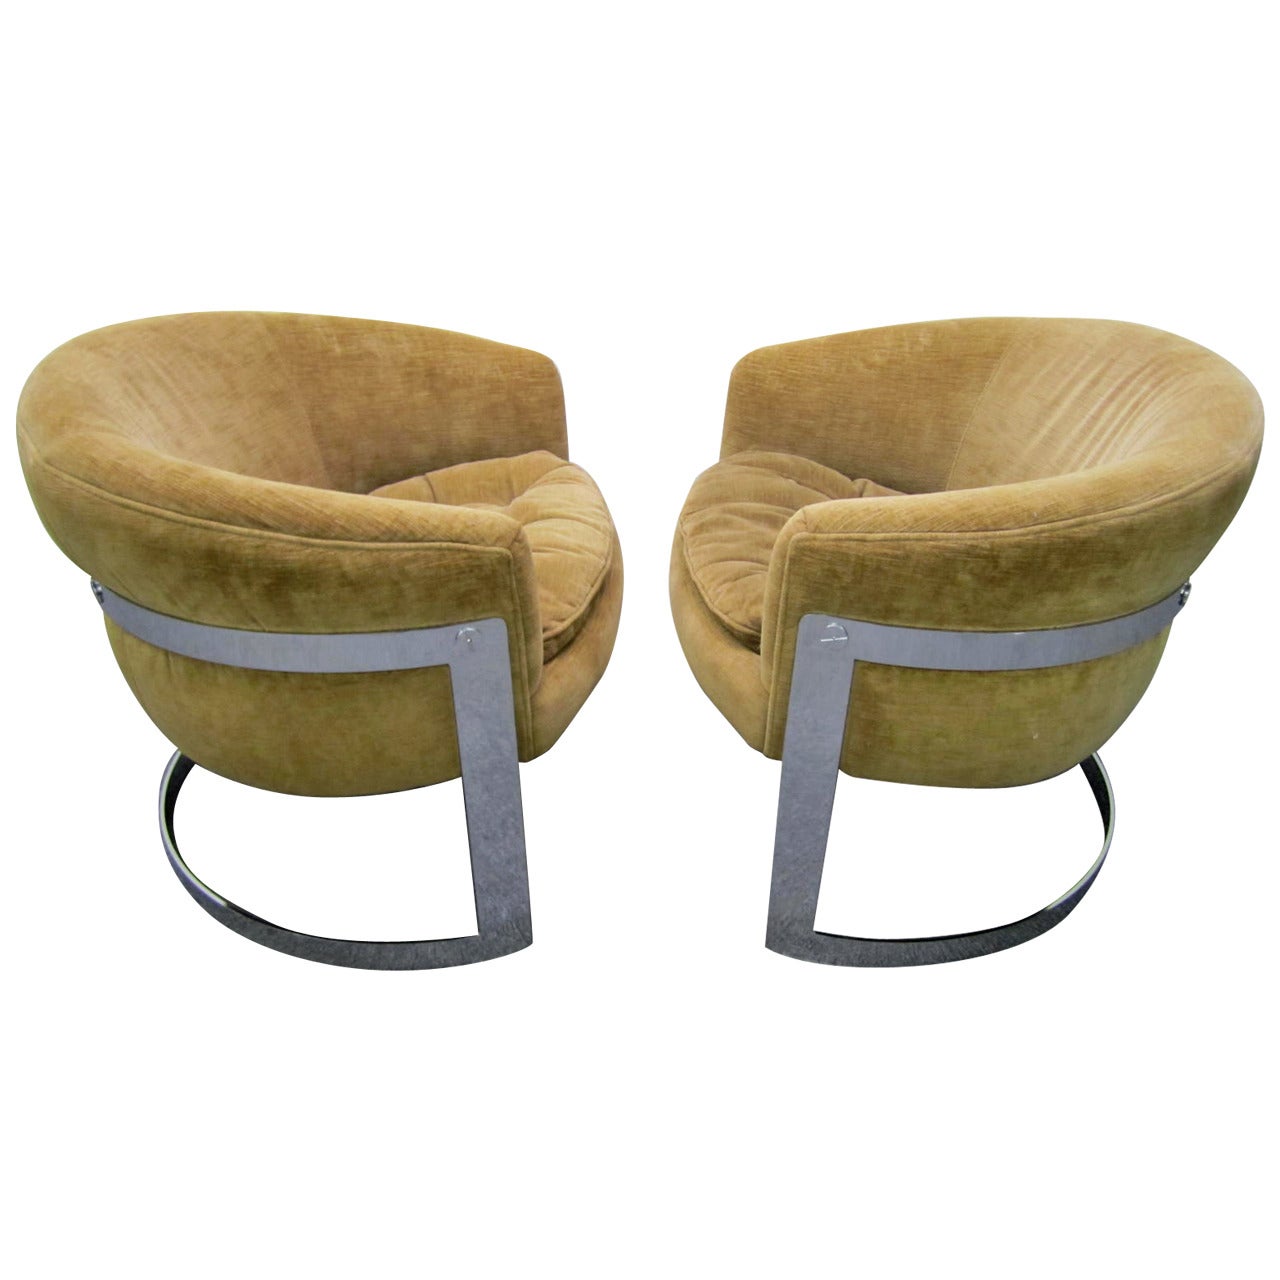 Pair of Barrel Back Chrome Lounge Chairs, Mid-Century Modern For Sale